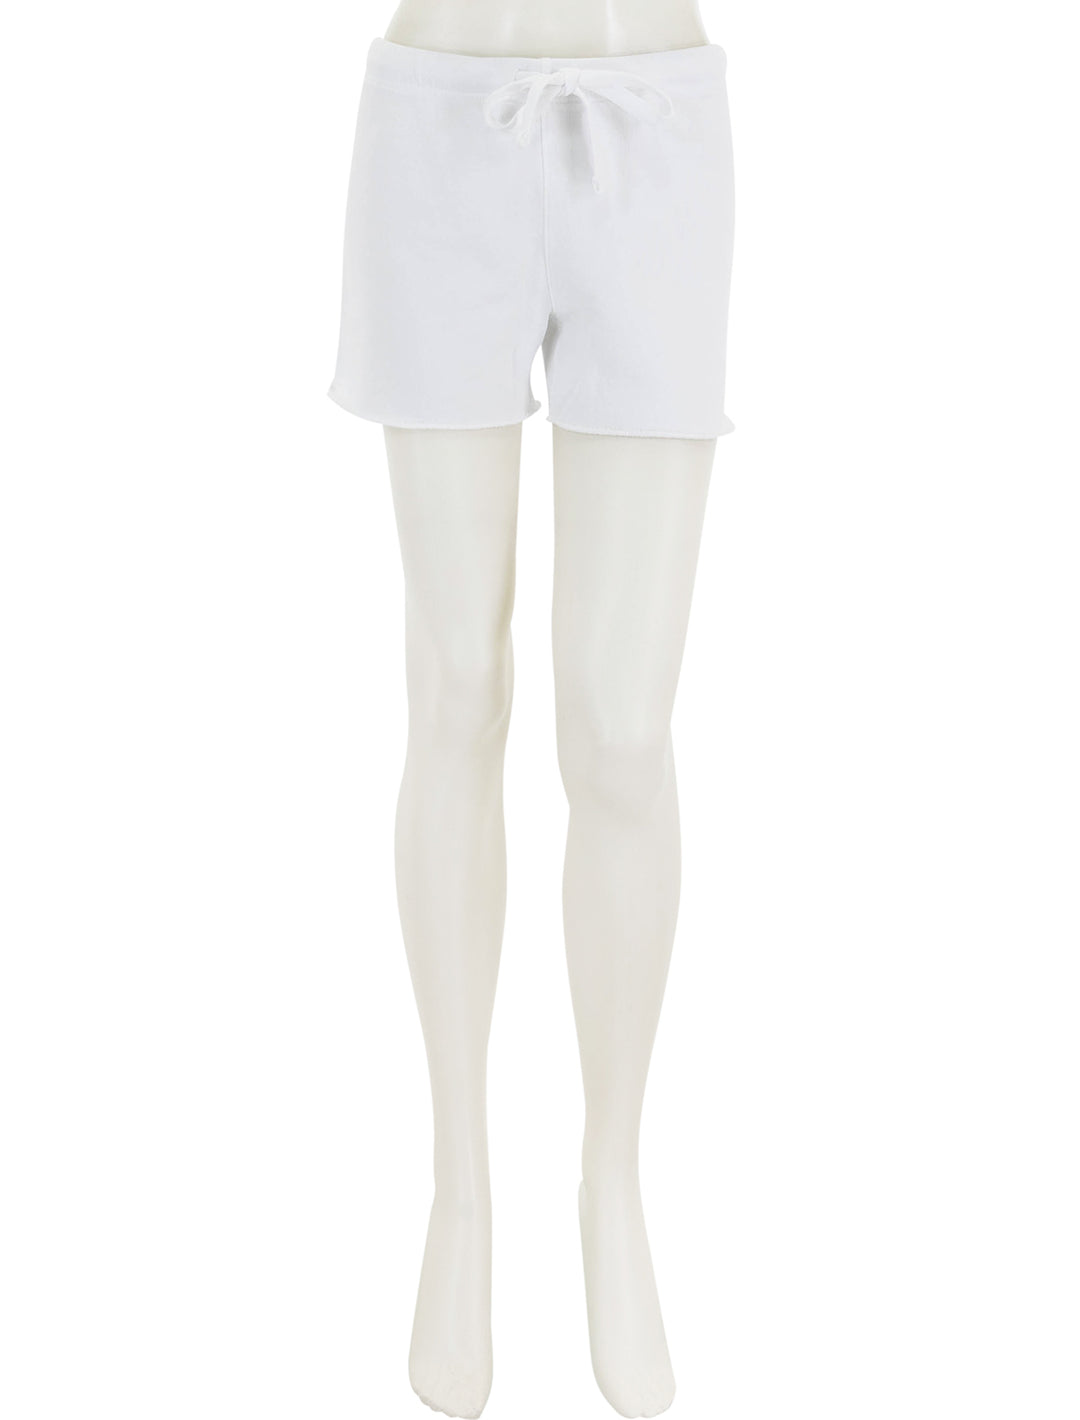 Front view of Frank & Eileen's pearl sweatshorts in white.